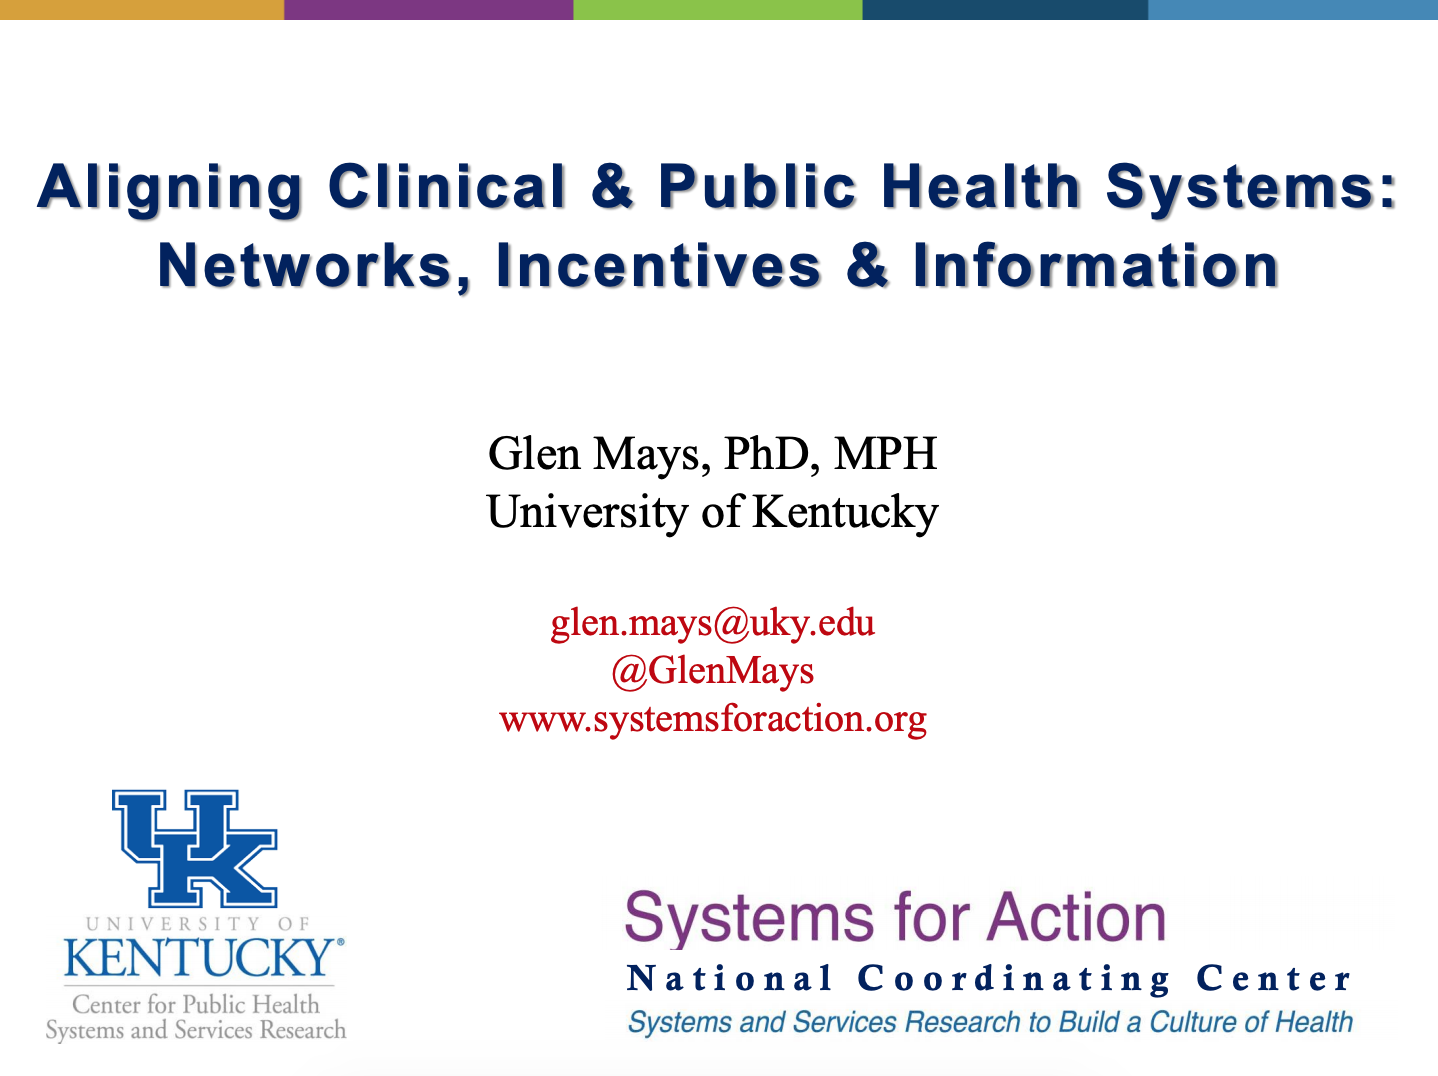 Aligning Clinical & Public Health Systems: Networks, Incentives & Information